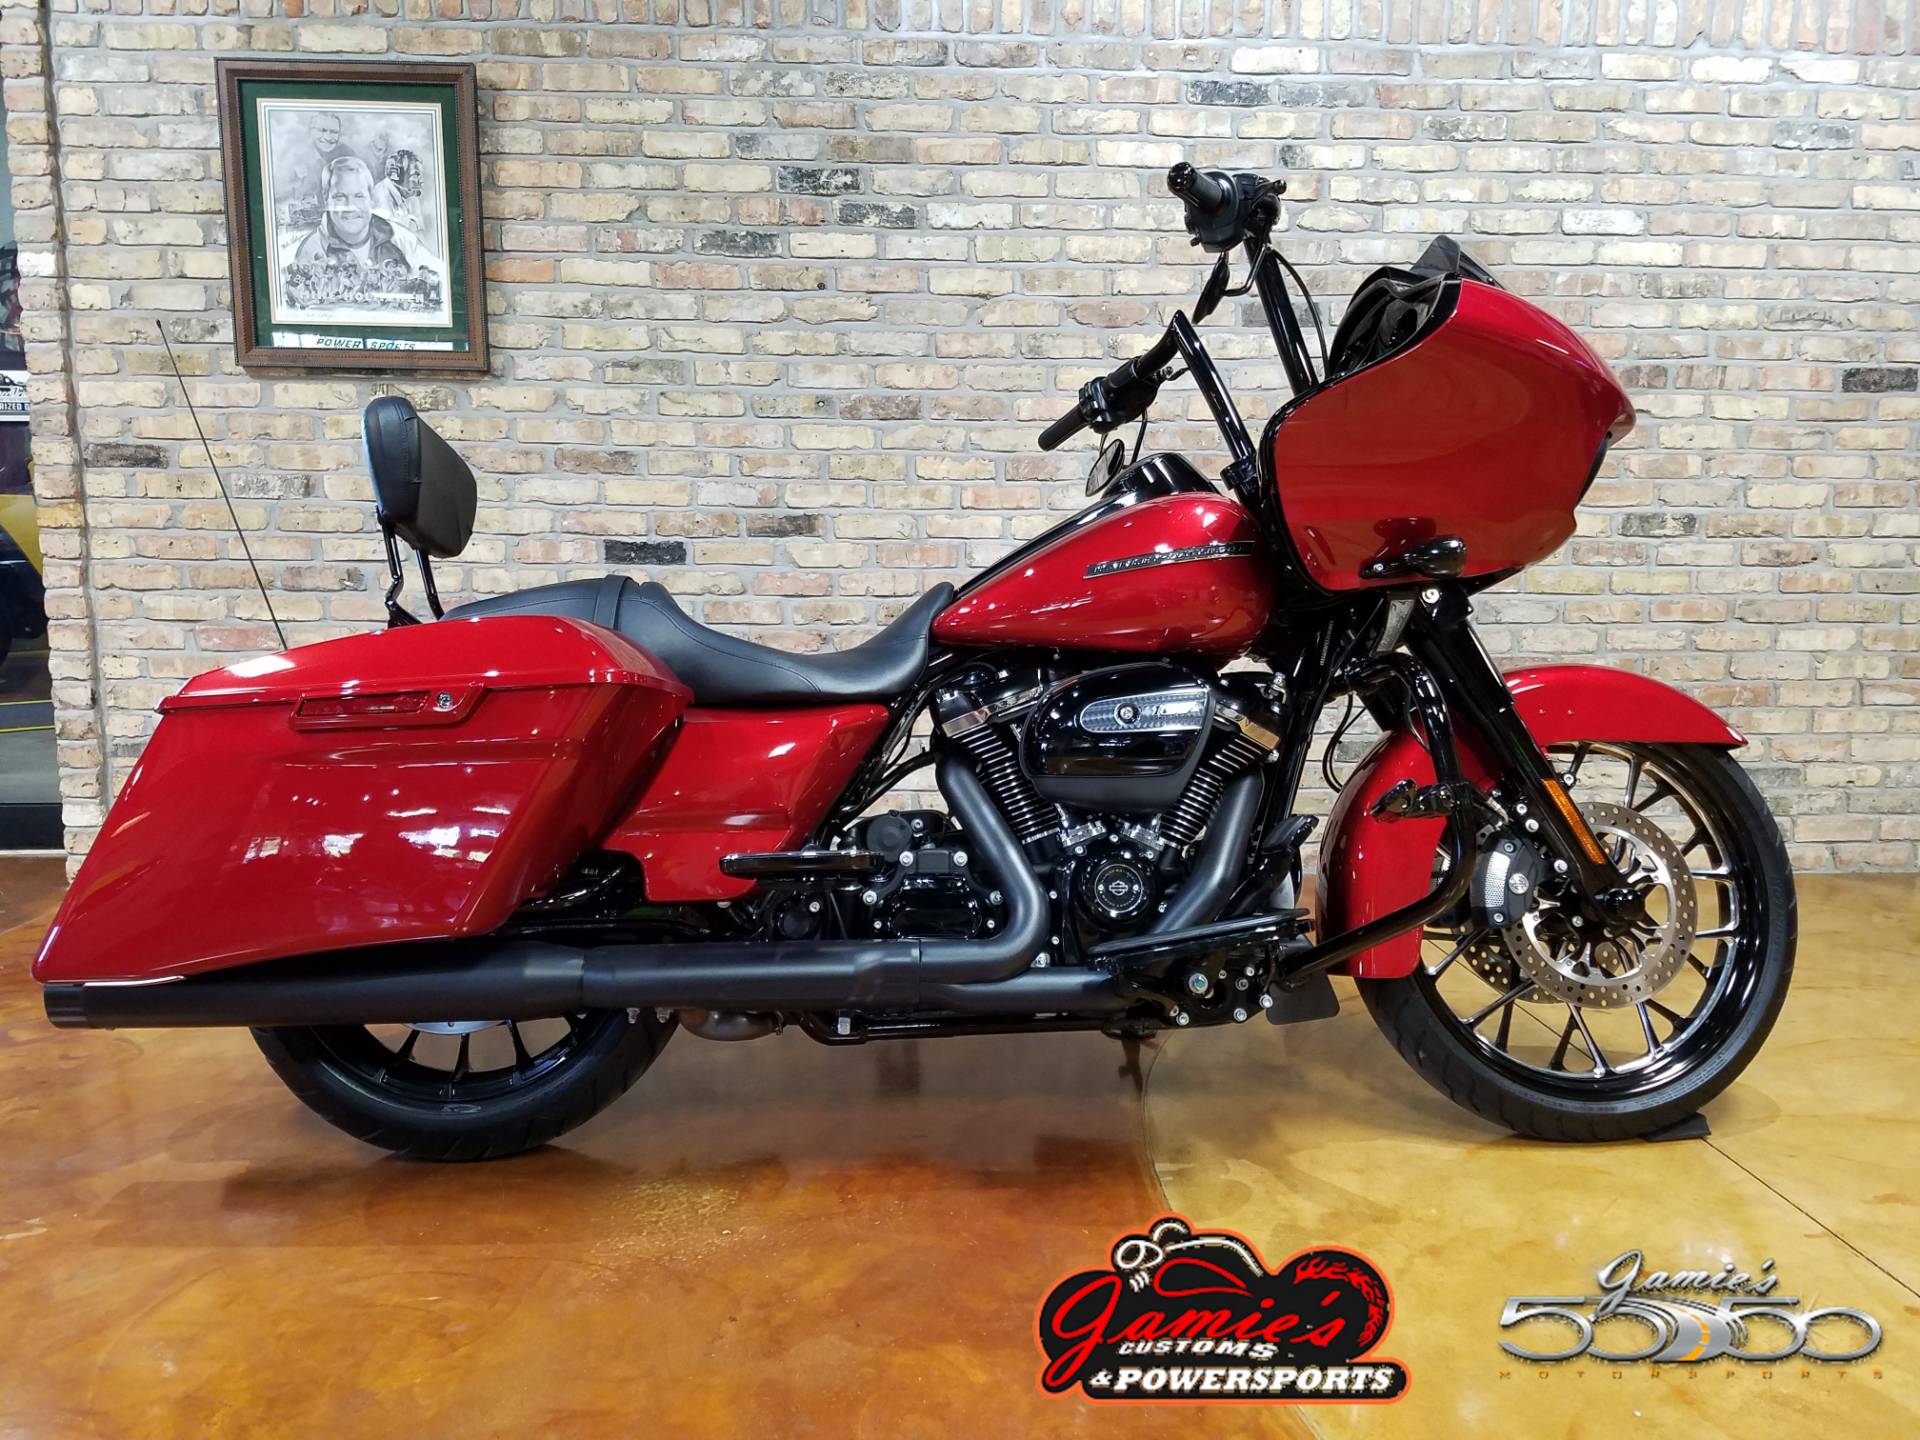 Used 2018 Harley Davidson Road Glide Special Motorcycles In Big Bend Wi 4332 Wicked Red